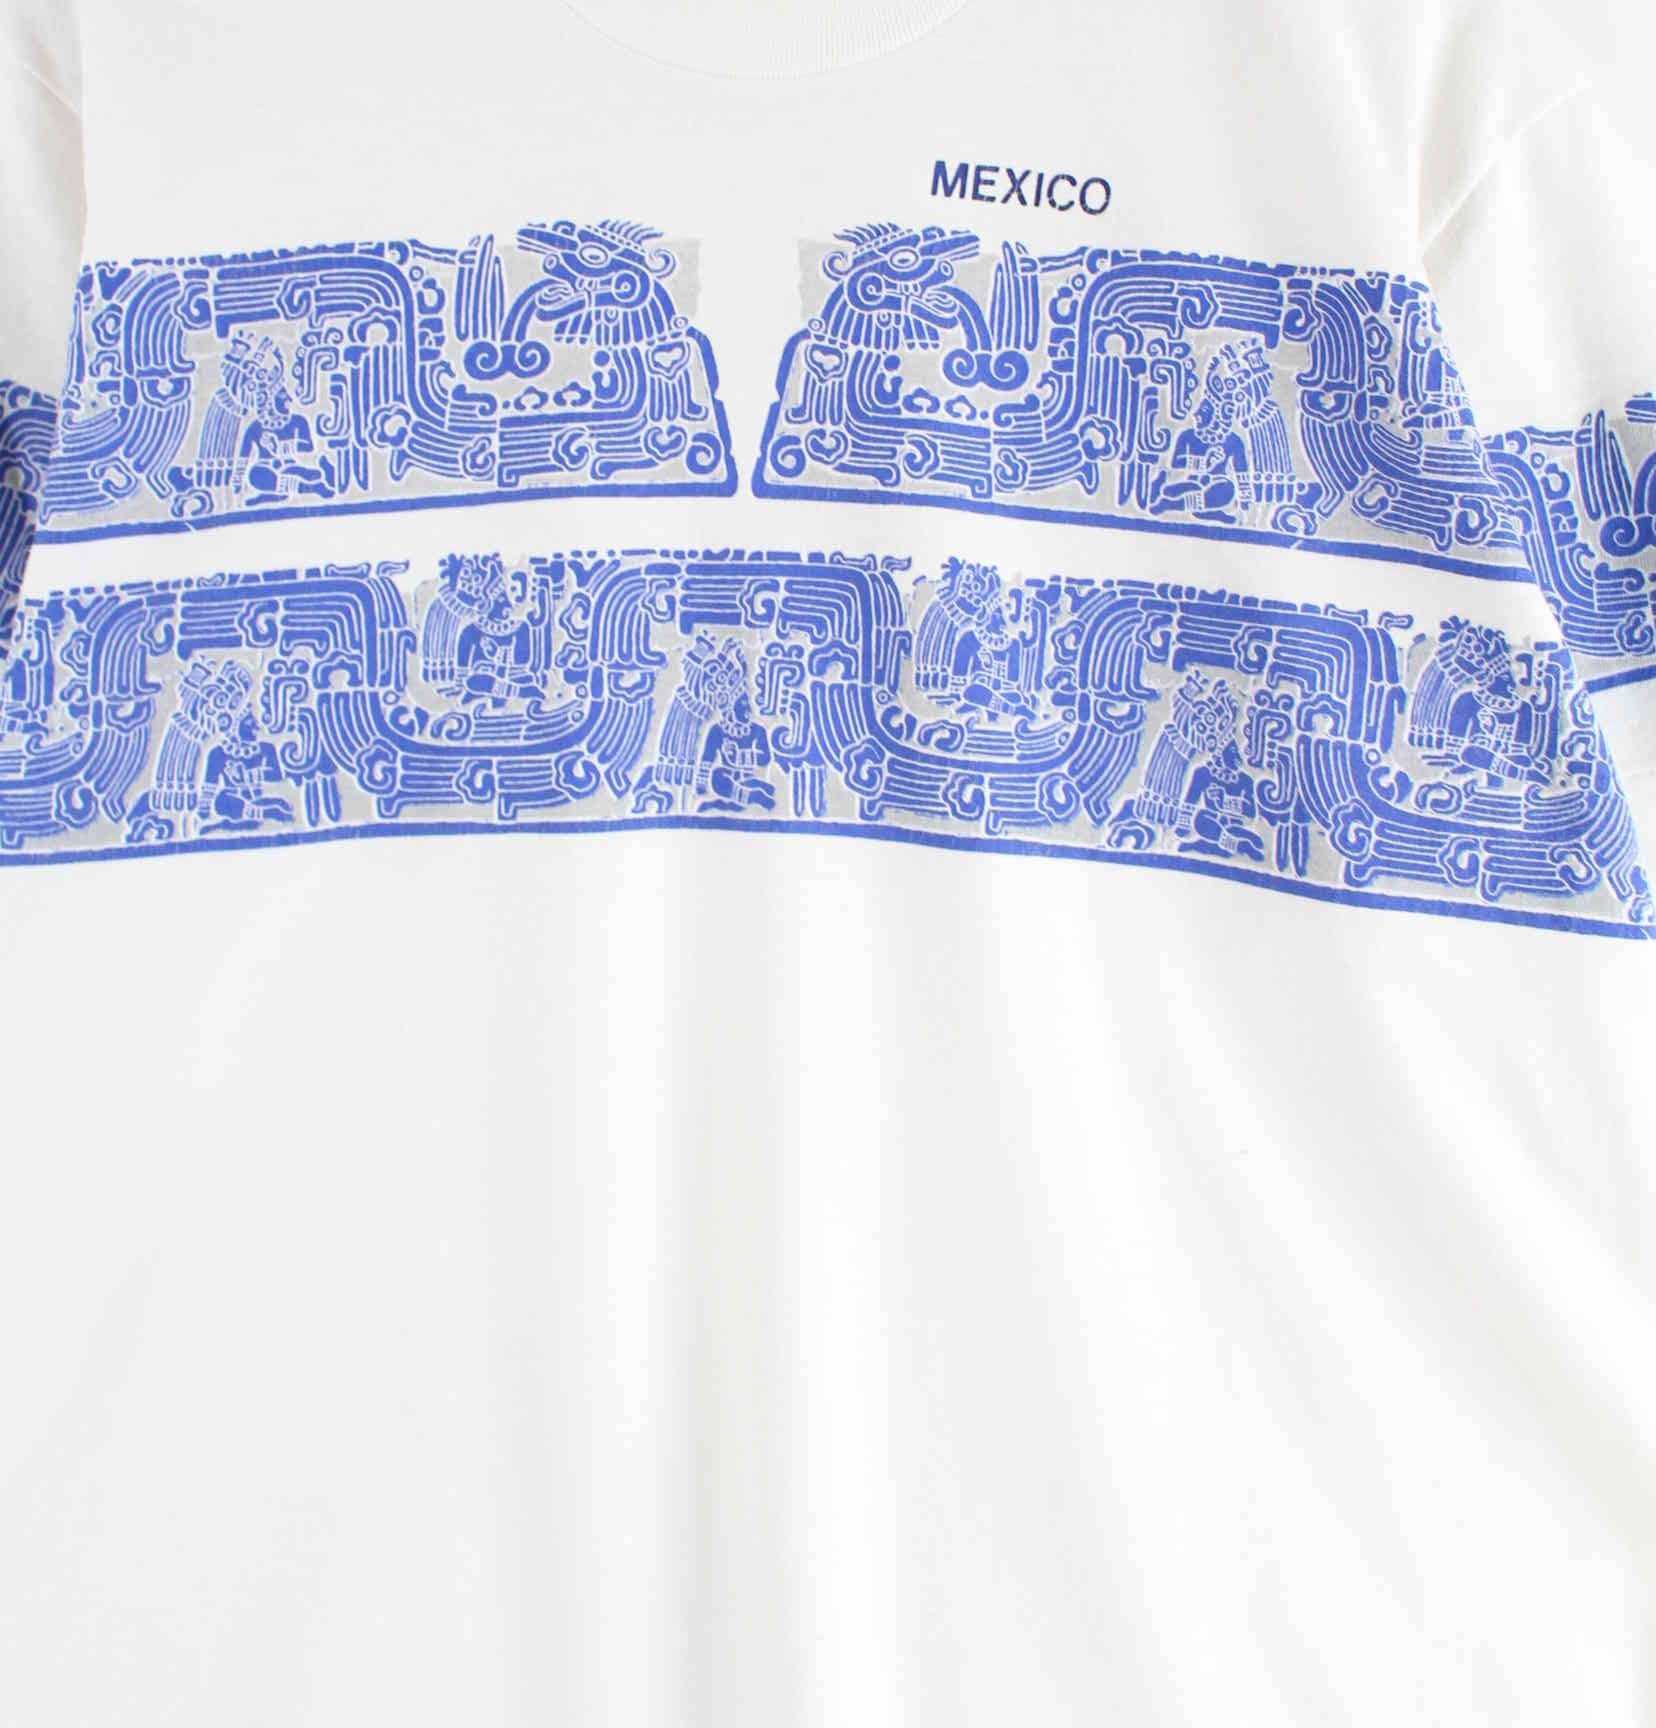 Vintage 90s Mexico Print Single Stitched T-Shirt Weiß S (detail image 1)